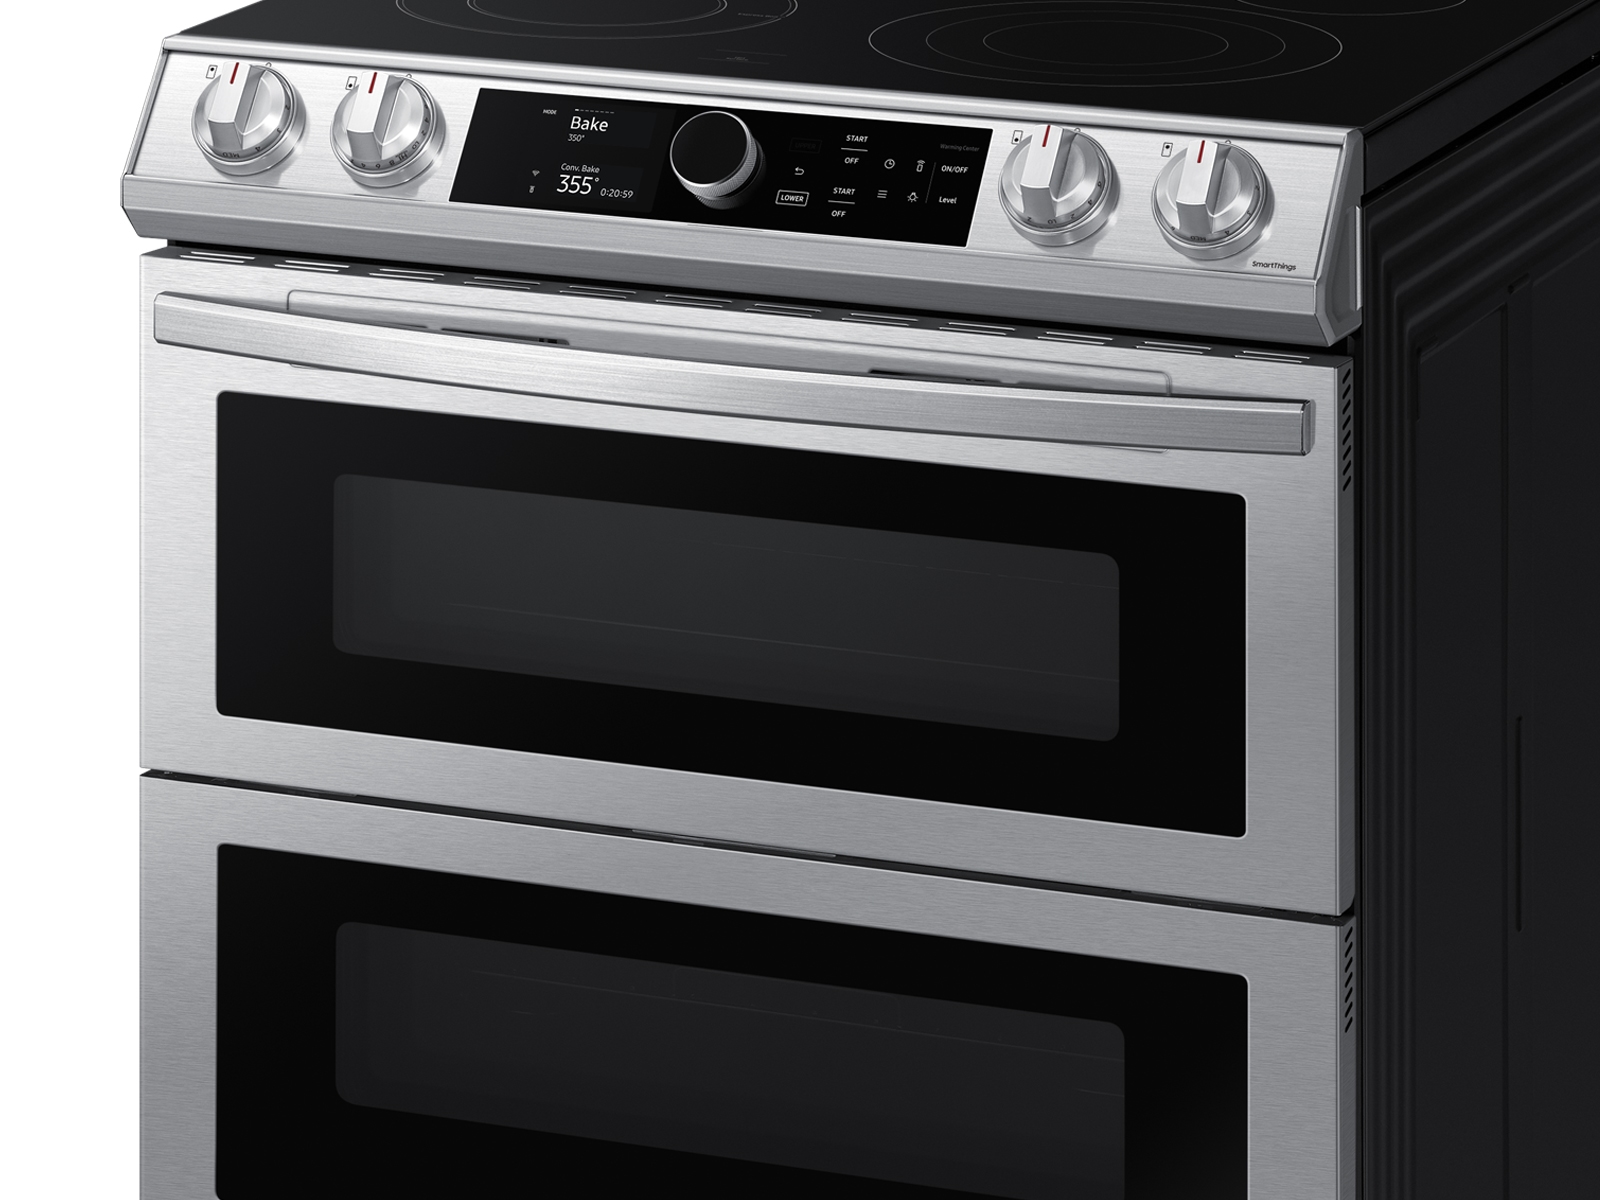 NY63T8751SS by Samsung - 6.3 cu. ft. Flex Duo™ Front Control Slide-in Dual  Fuel Range with Smart Dial, Air Fry, and Wi-Fi in Stainless Steel